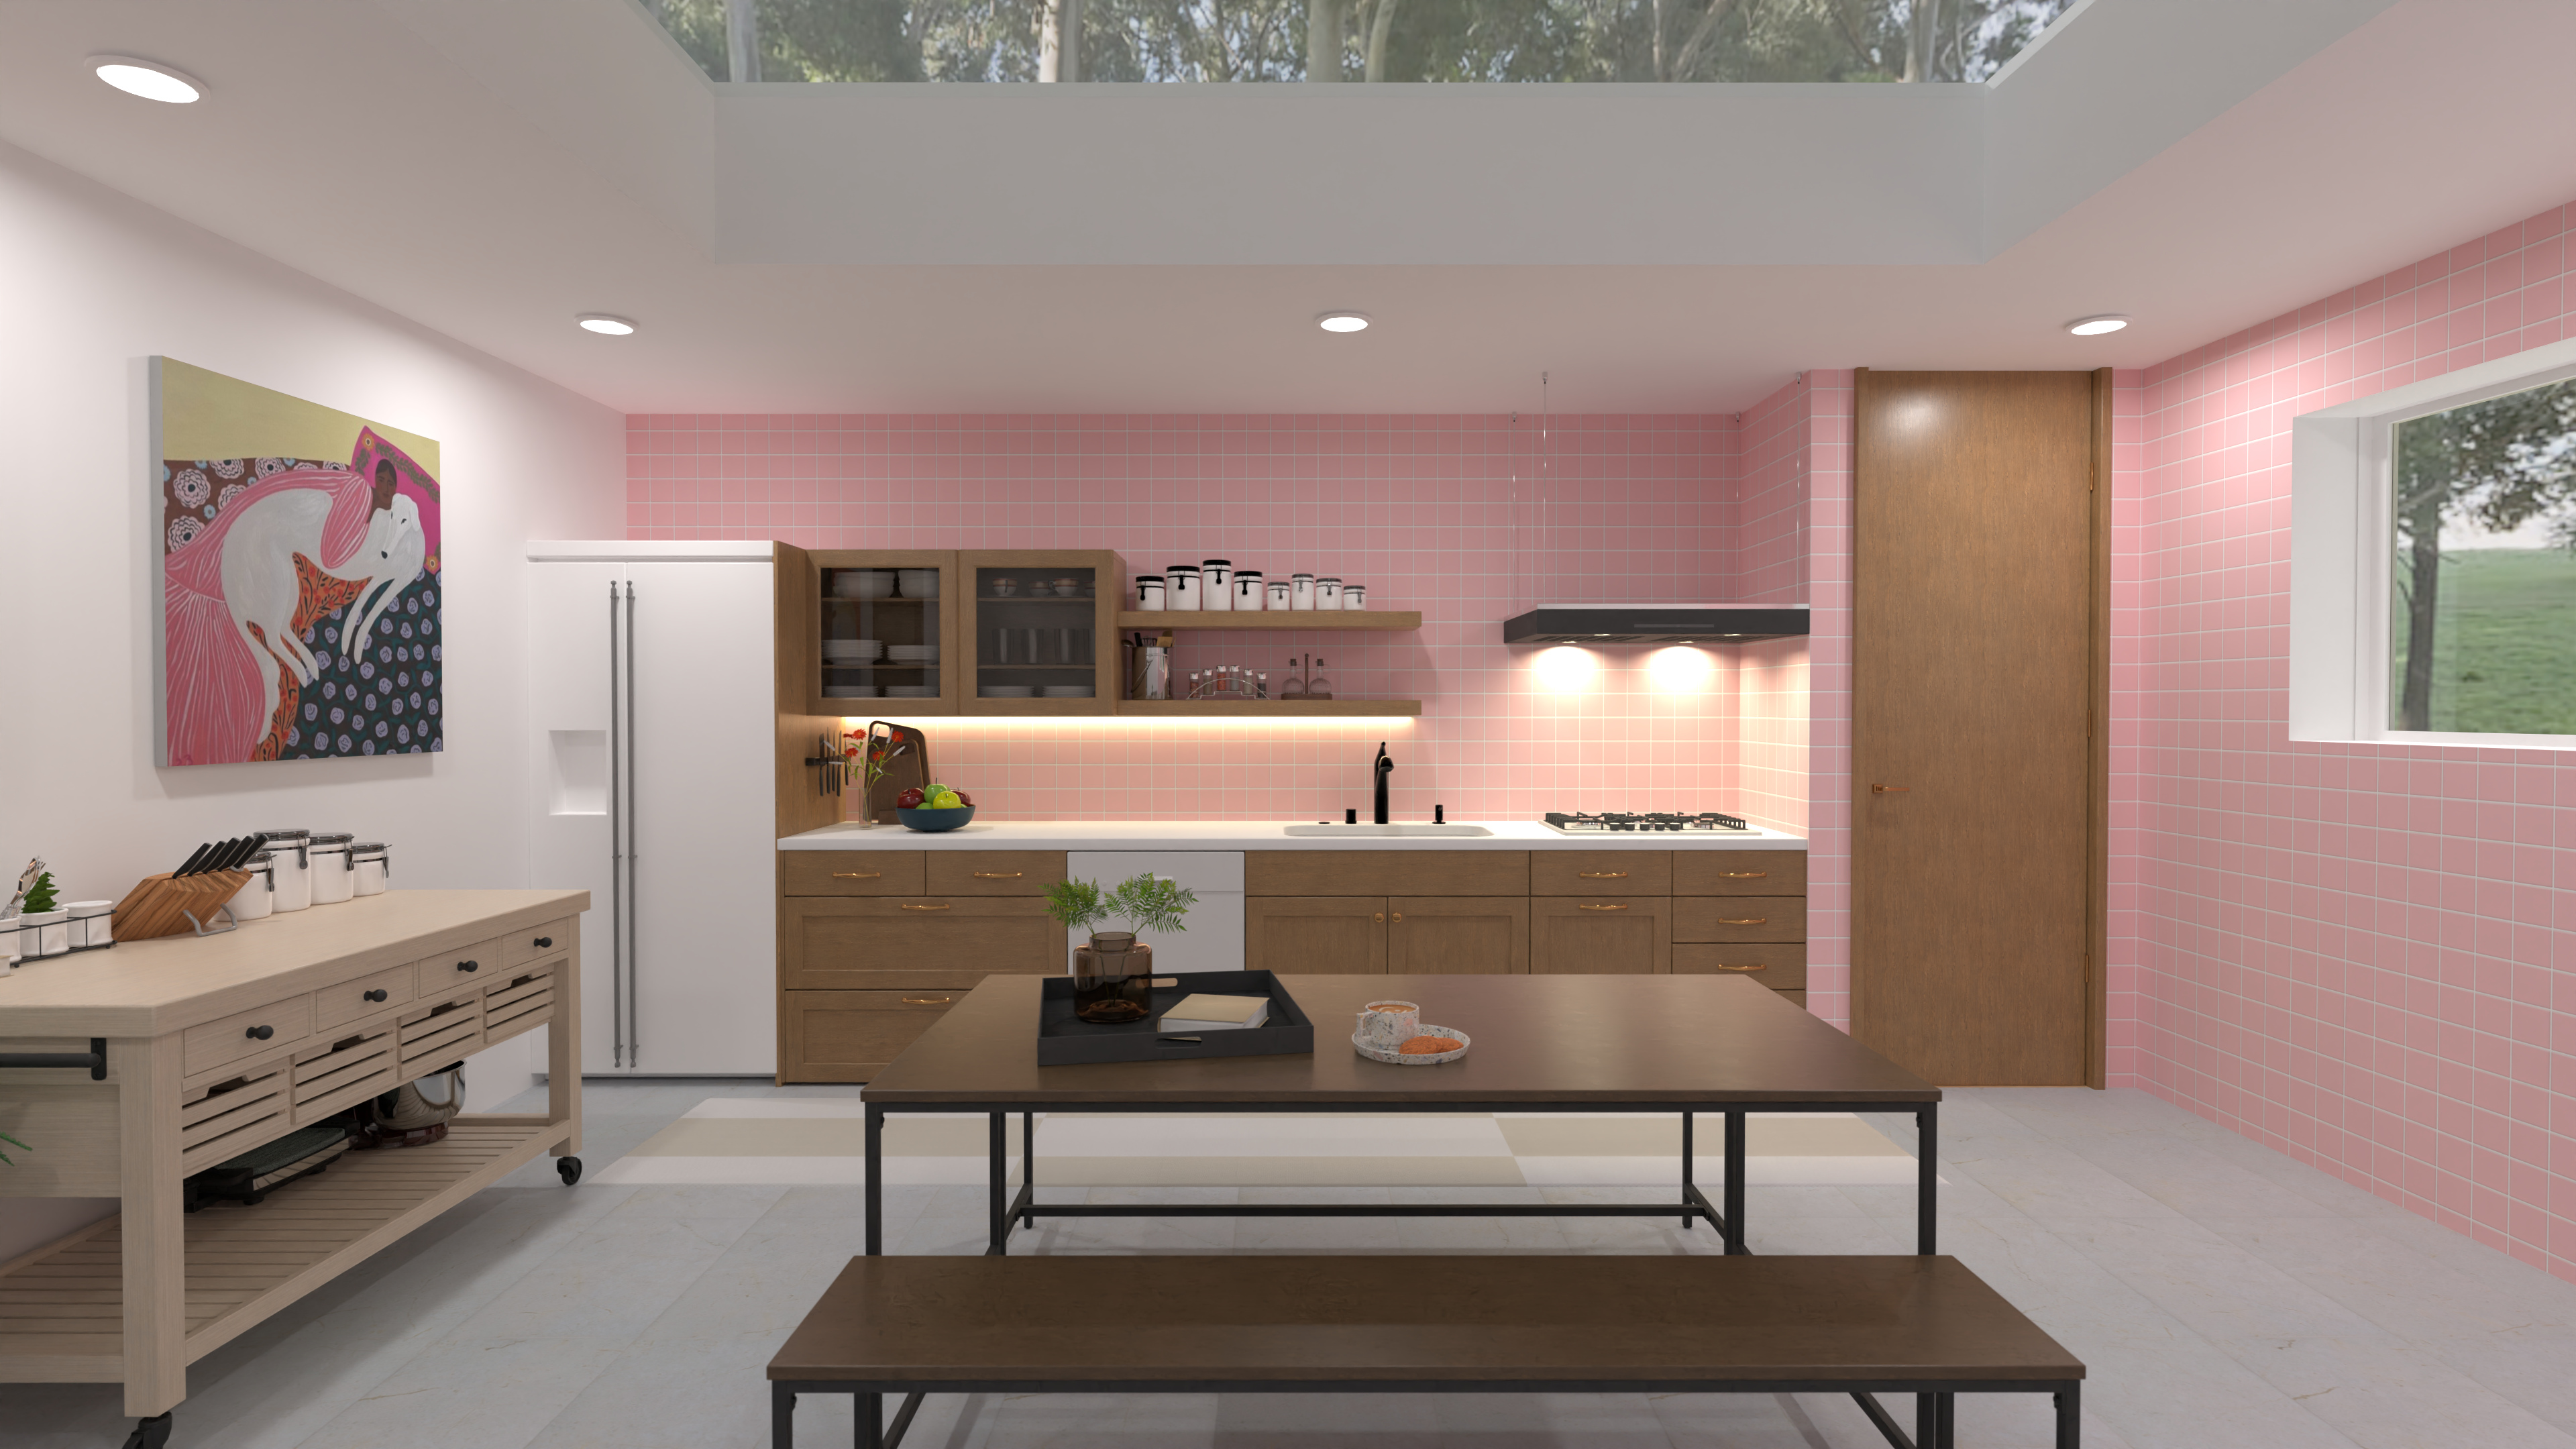 Retro kitchen with skylight 17739907 by Dellen image